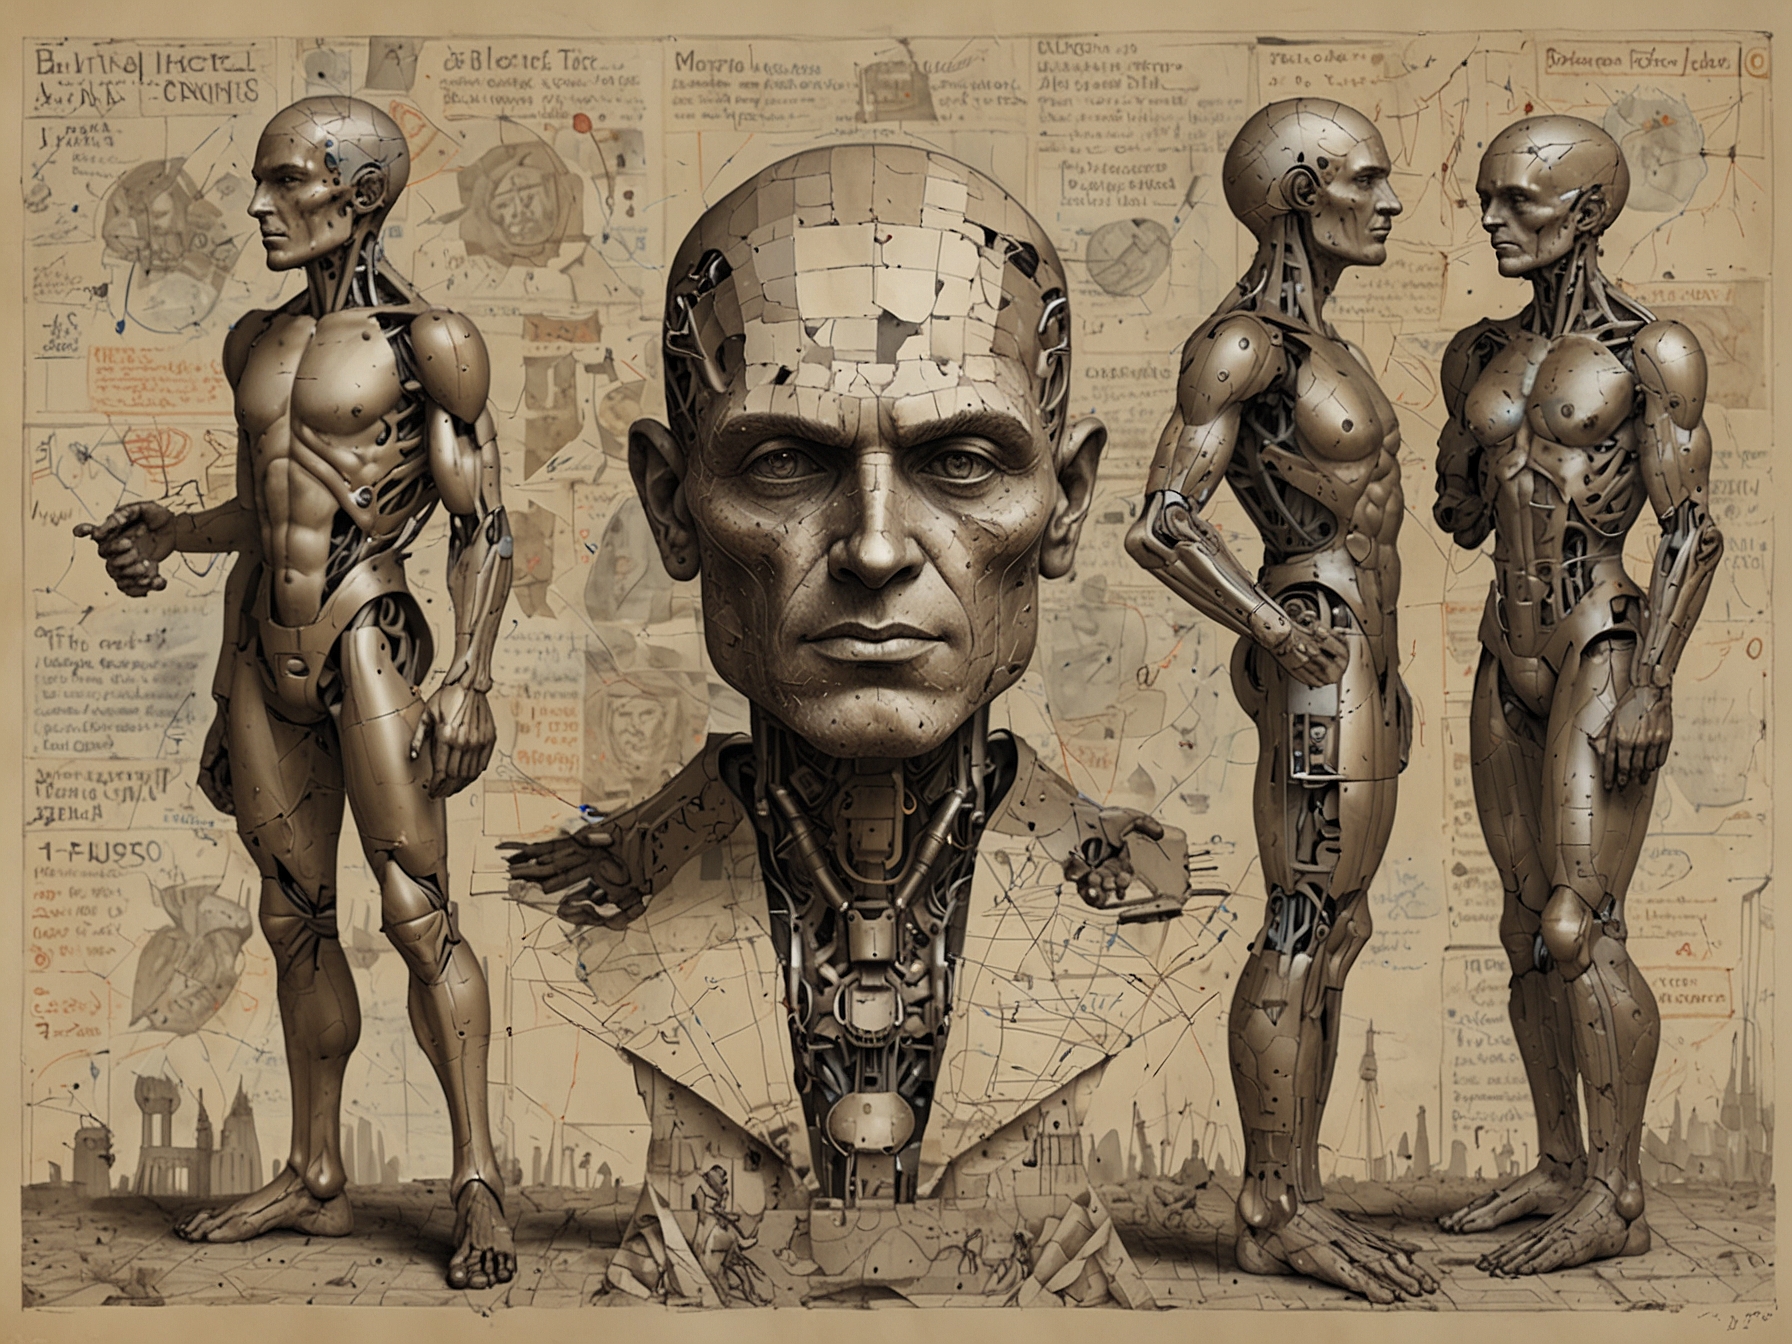 A collage depicting the evolution of AI, starting with ancient Greek mythology's mechanical men like Talos, through Alan Turing's early work, and milestones like the Dartmouth Conference.